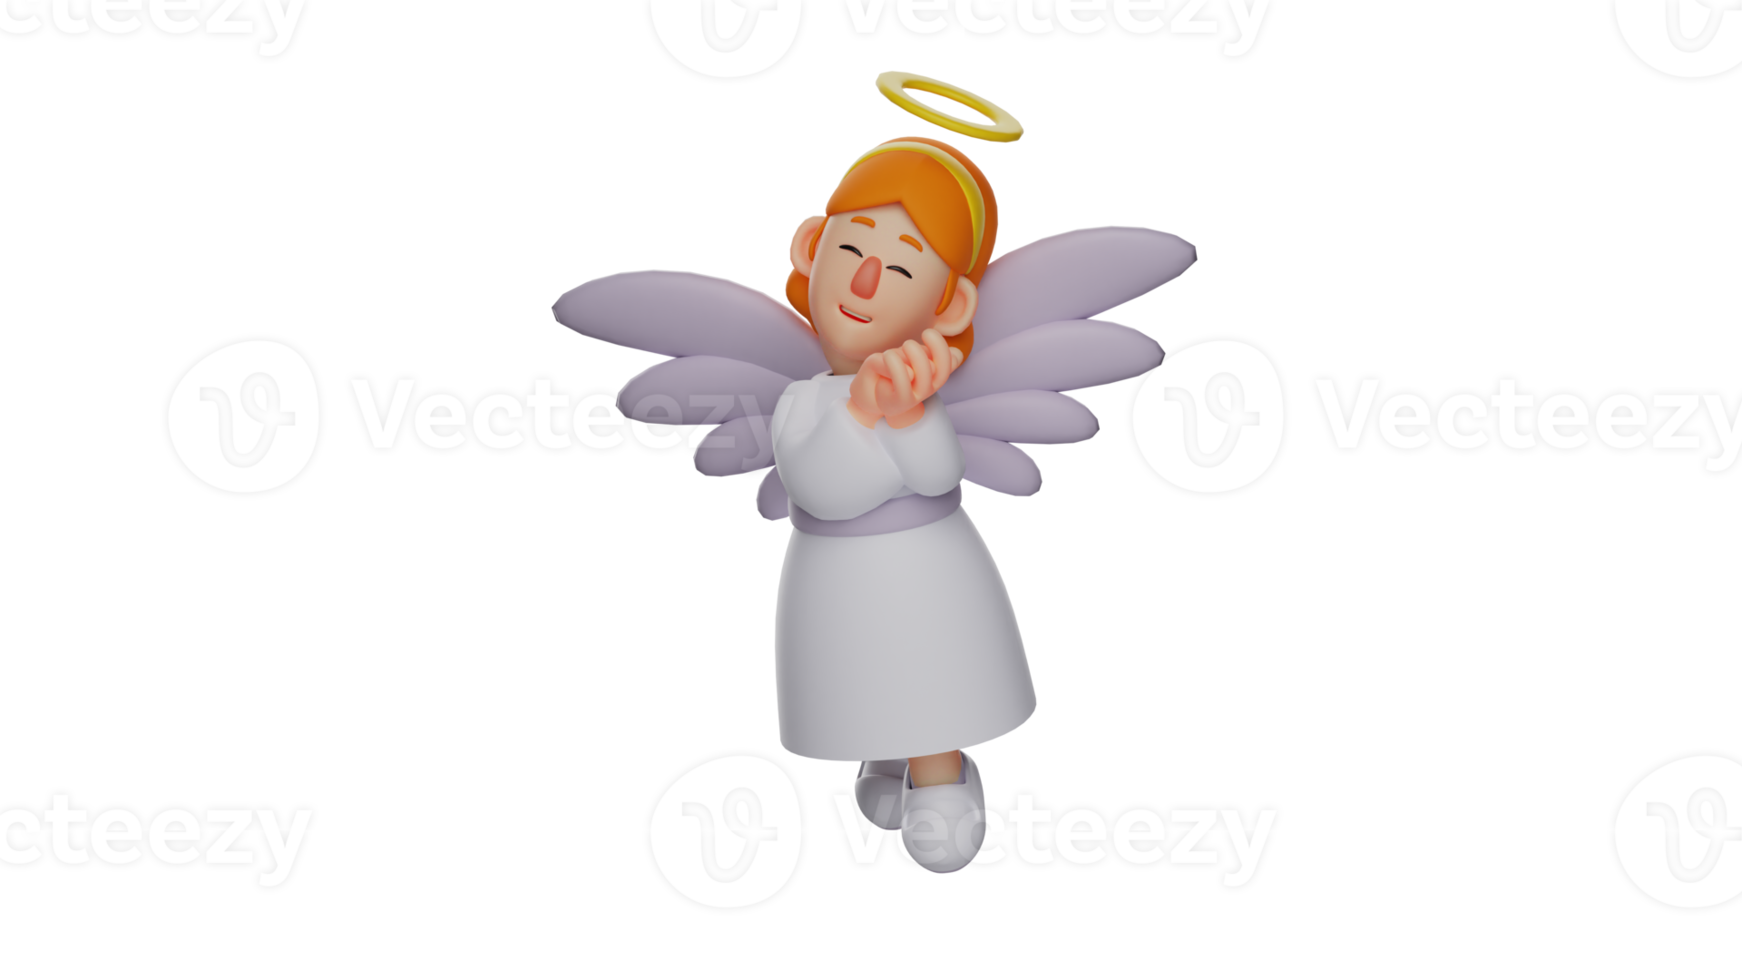 3D illustration. Adorable Fairy 3D Cartoon Character. Little elf with cute pose. The fairy closed her eyes and put her hand on her chin. The fairy smiled very sweetly. 3D cartoon character png